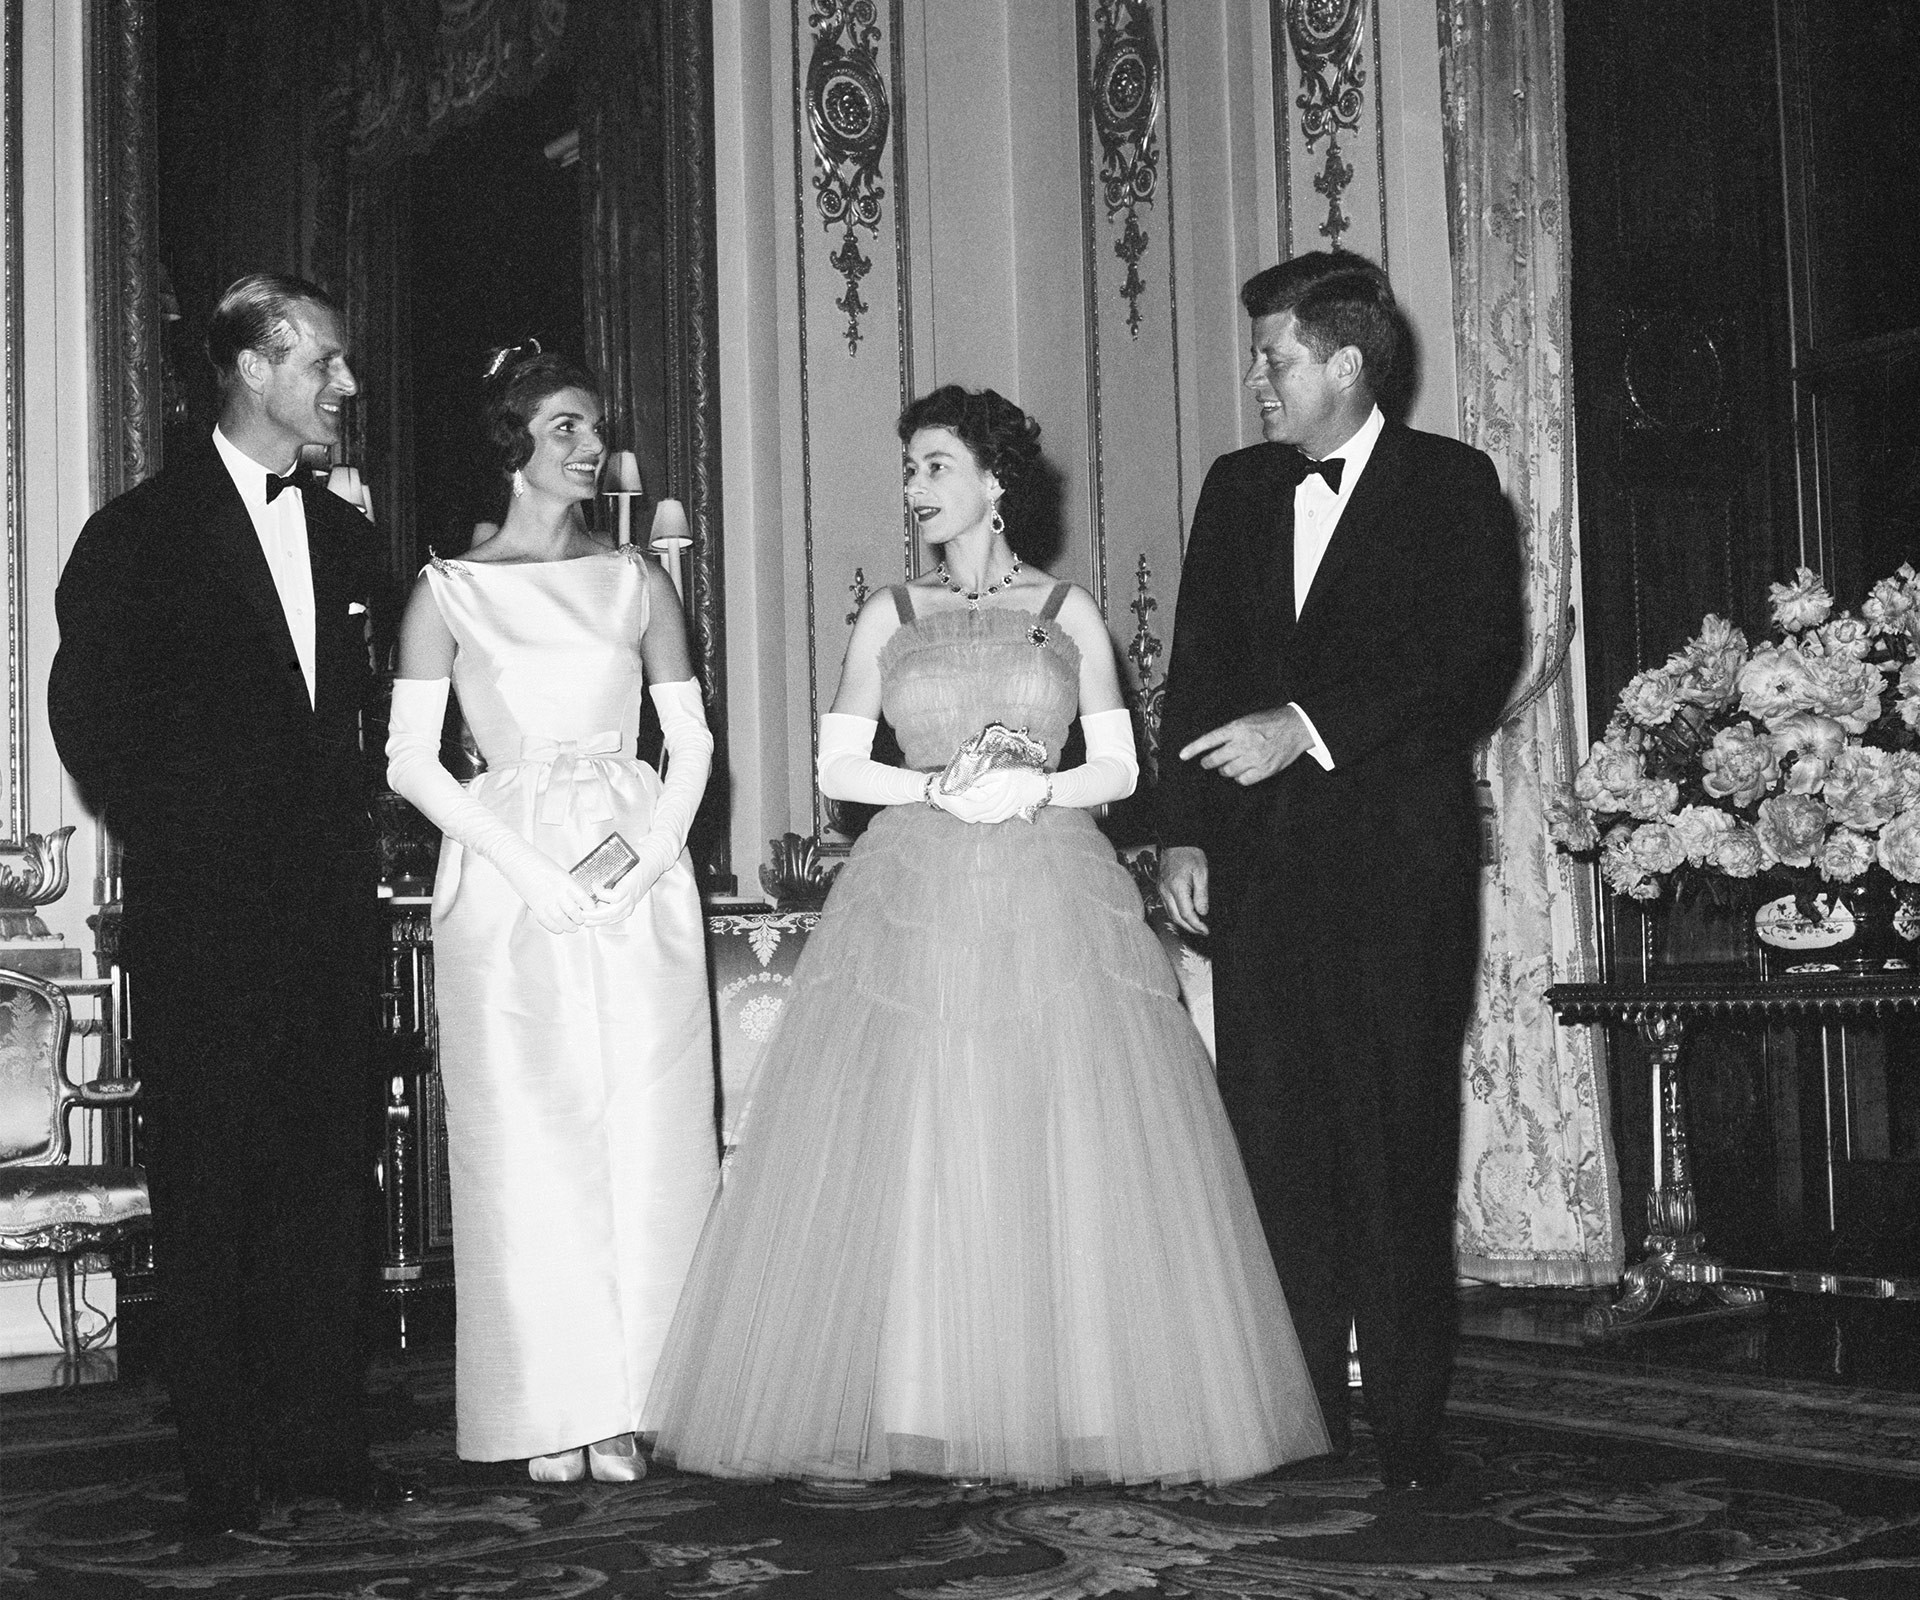 The Queen and John F. Kennedy